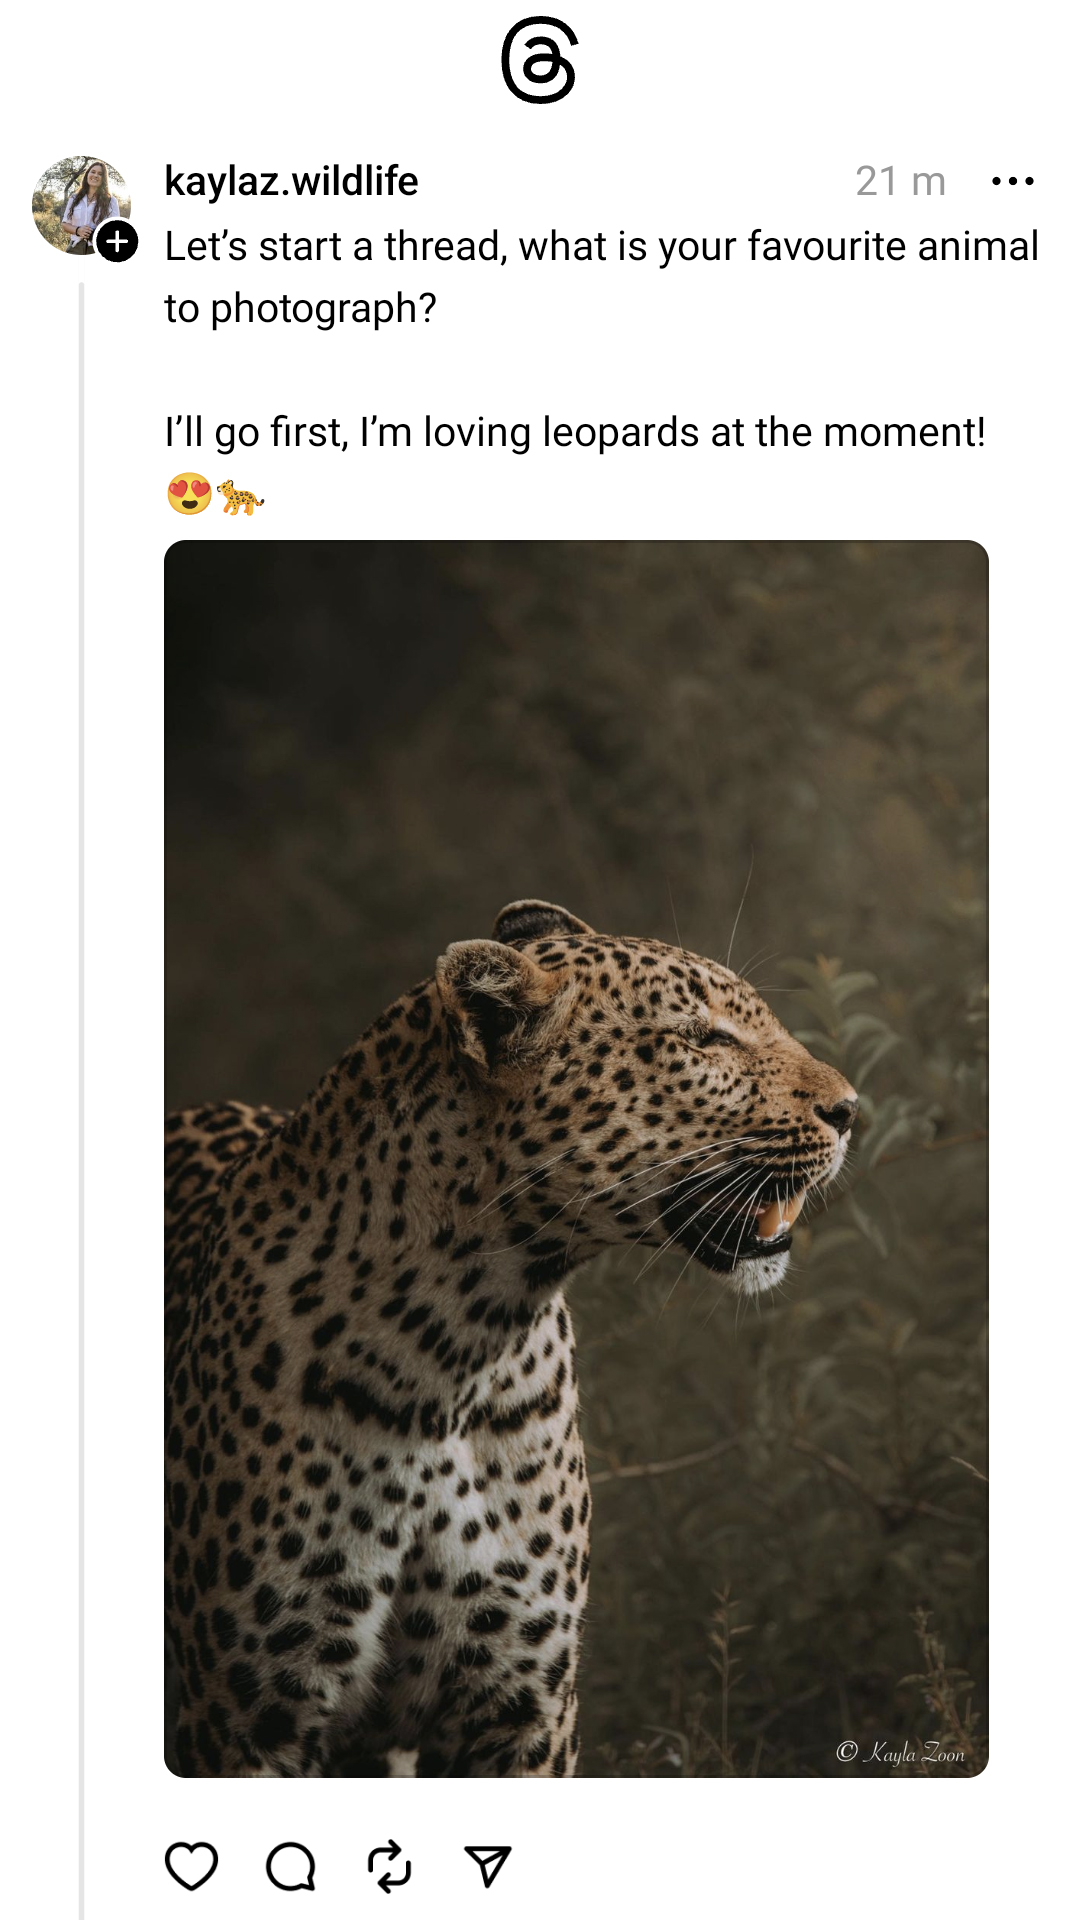 Threads app UI showing a photographer starting a Thread with their favorite wildlife photo